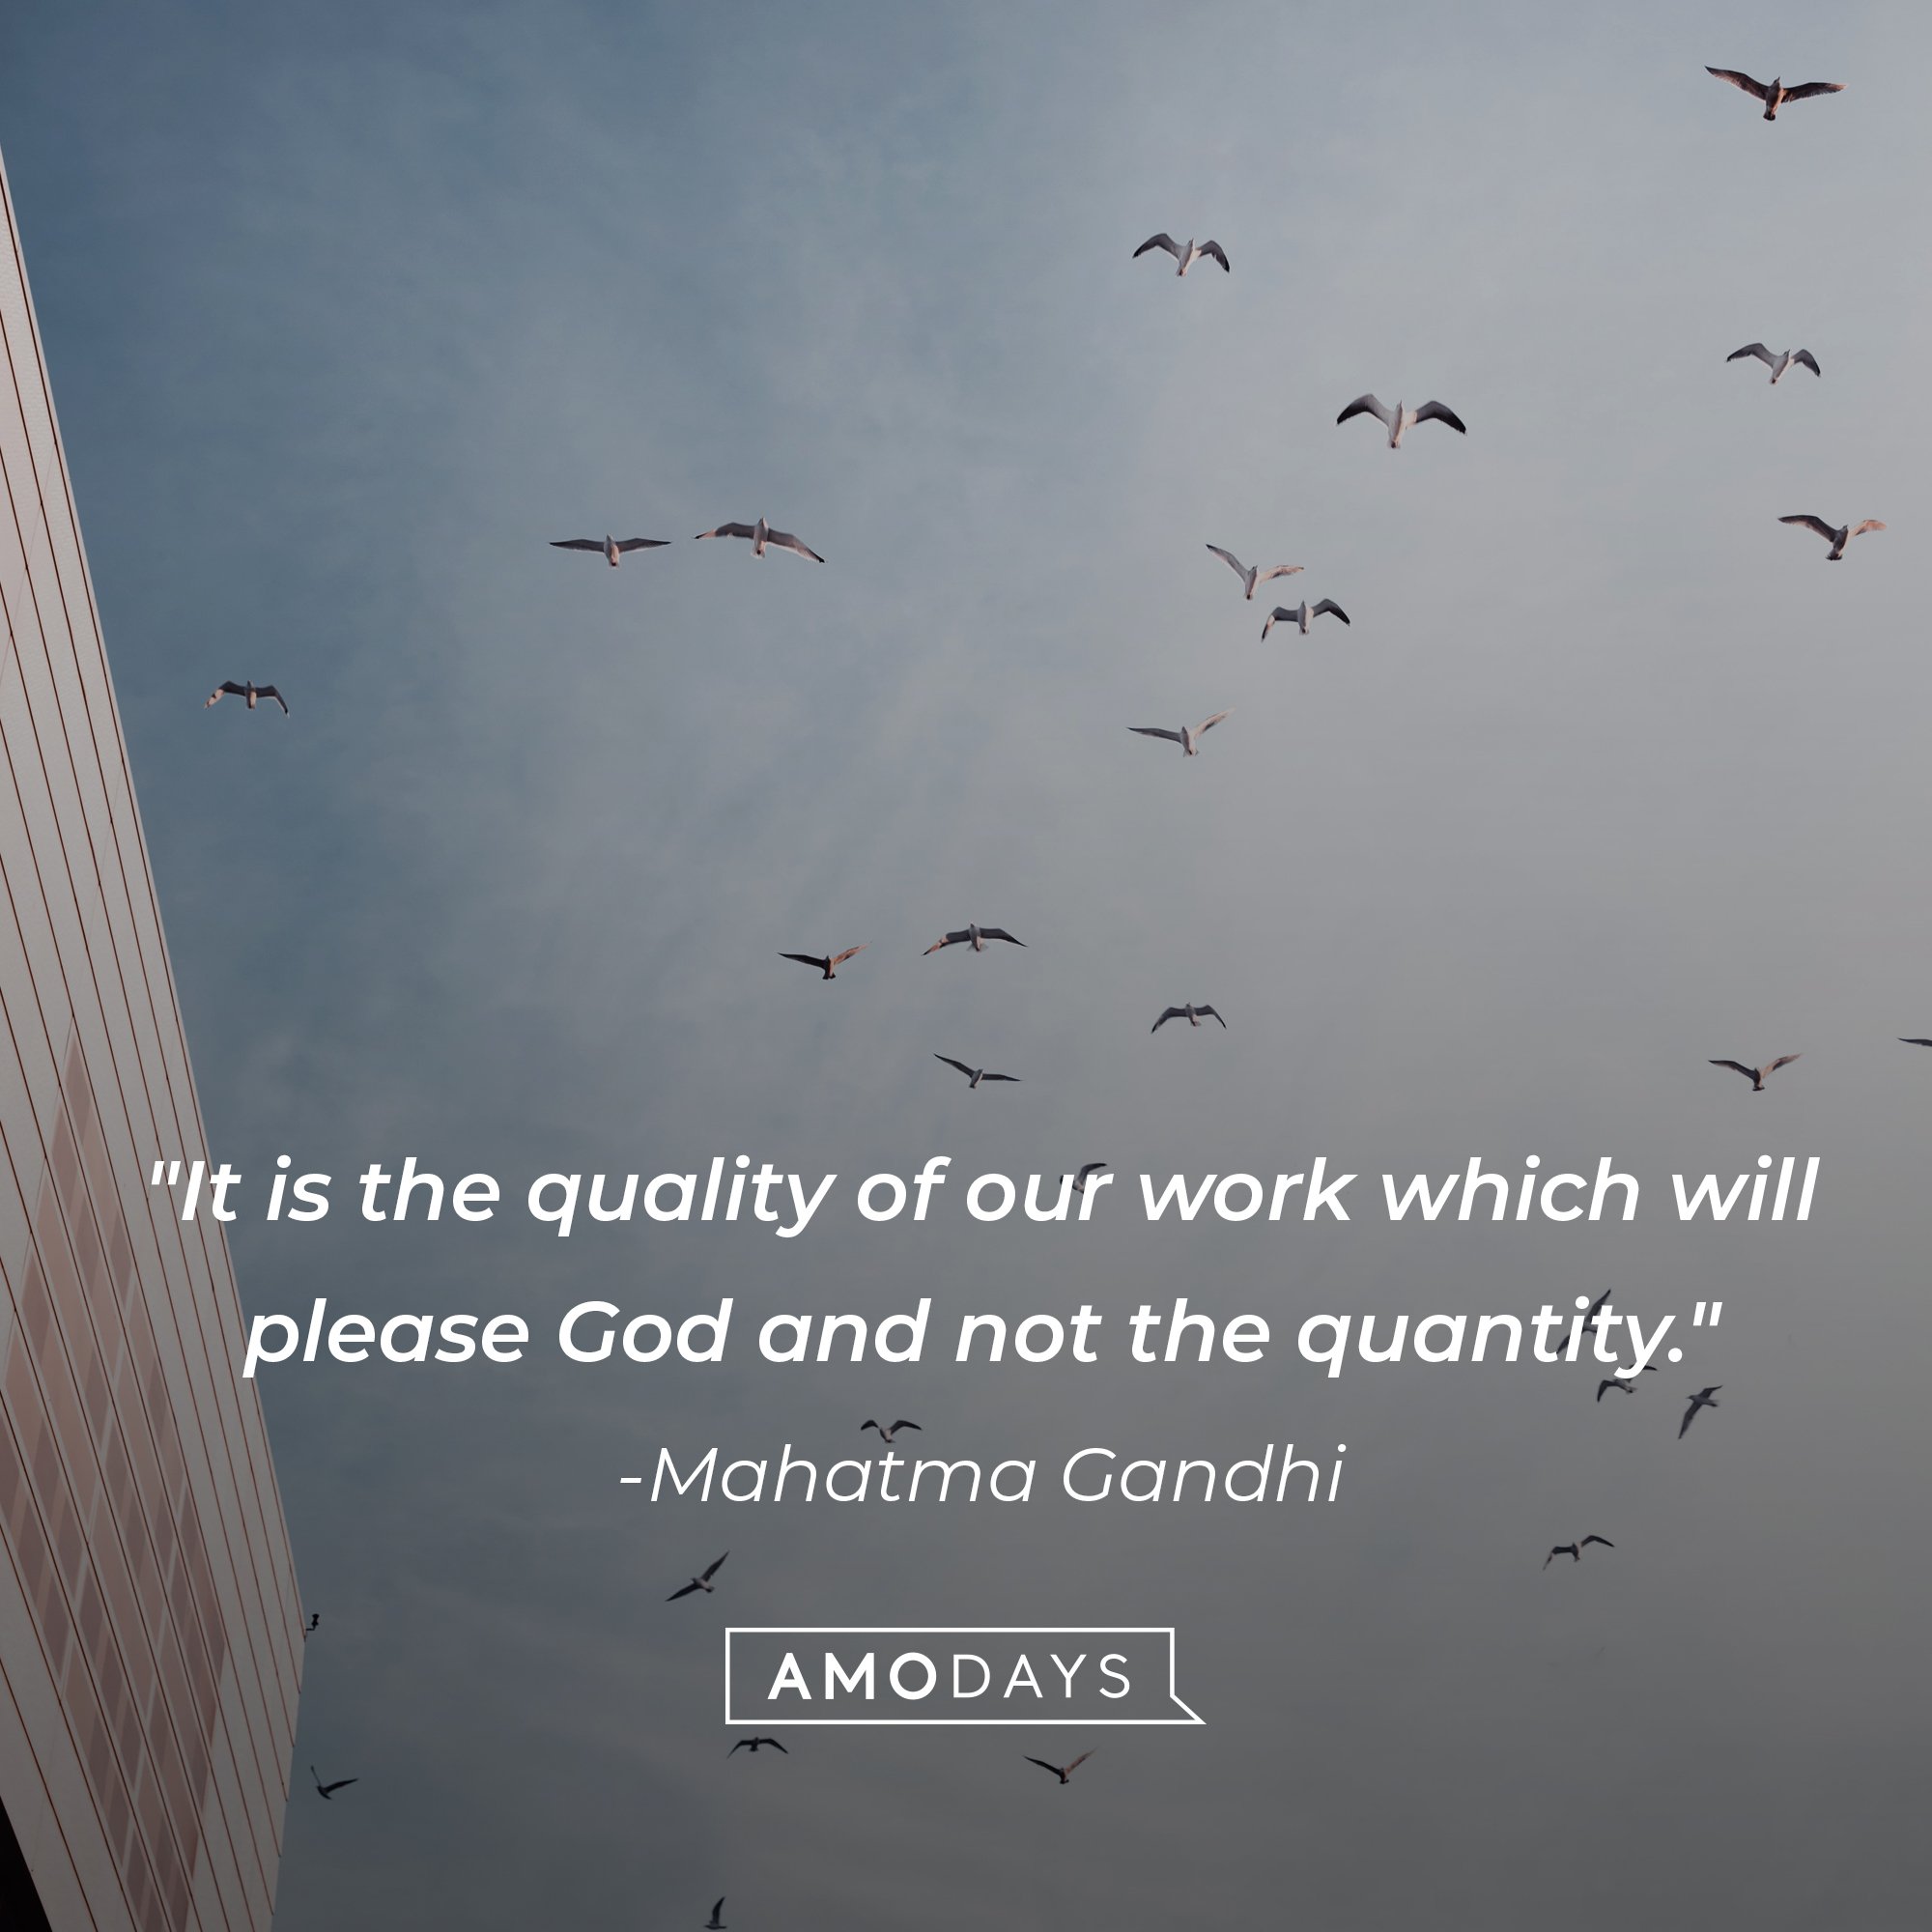 Mahatma Gandhi’s quote: "It is the quality of our work which will please God and not the quantity." | Image: AmoDays 